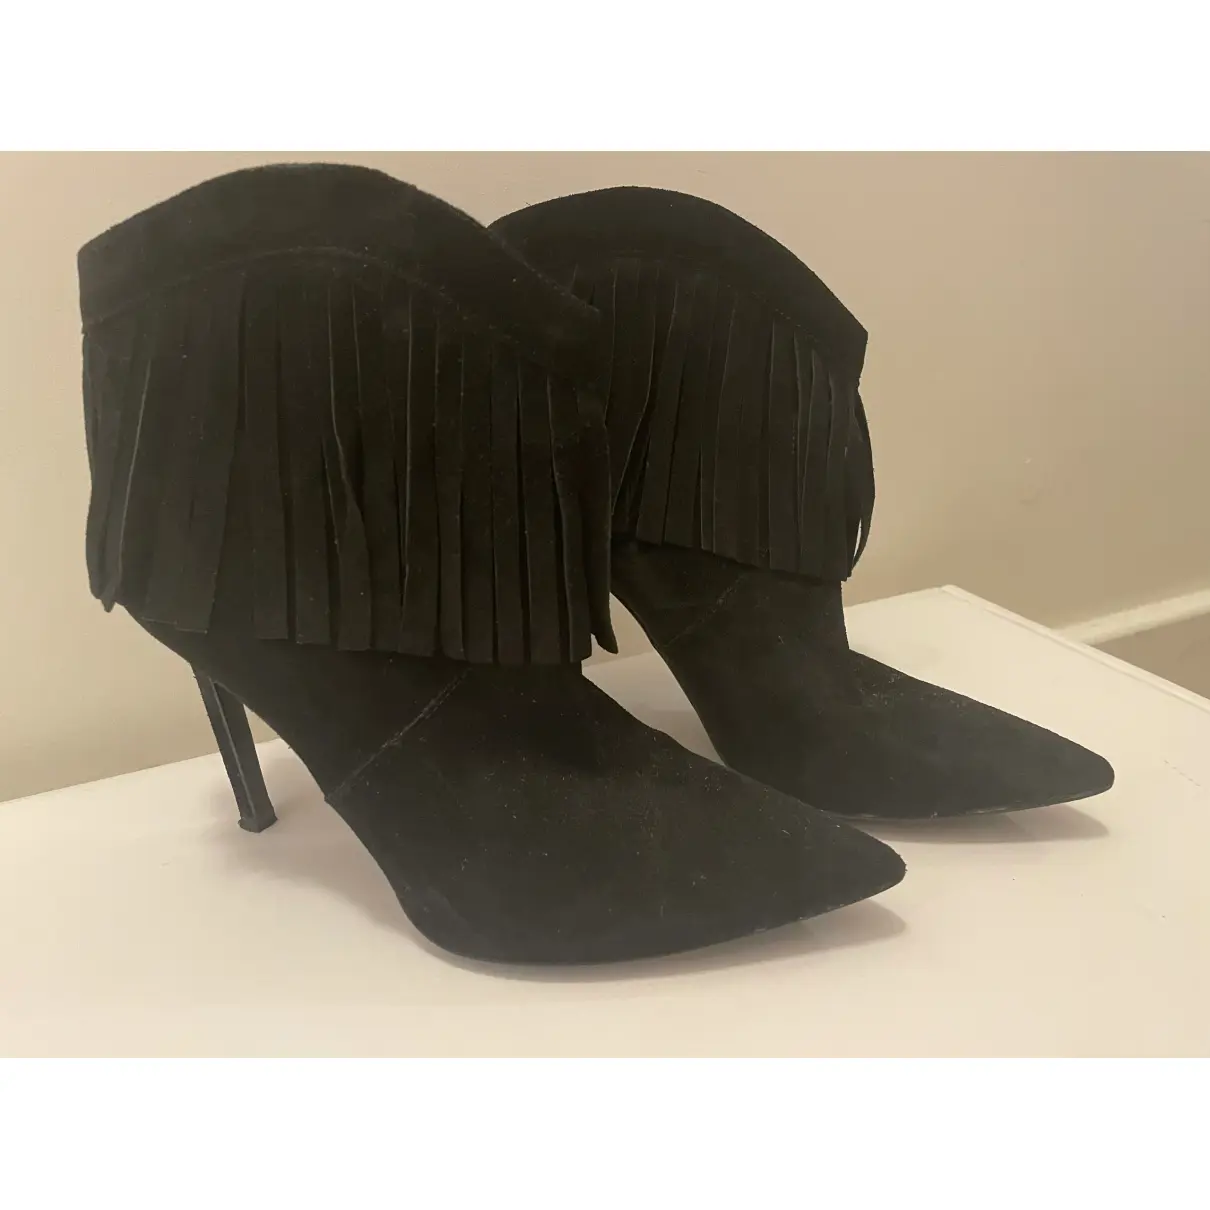 Buy Russell & Bromley Ankle boots online